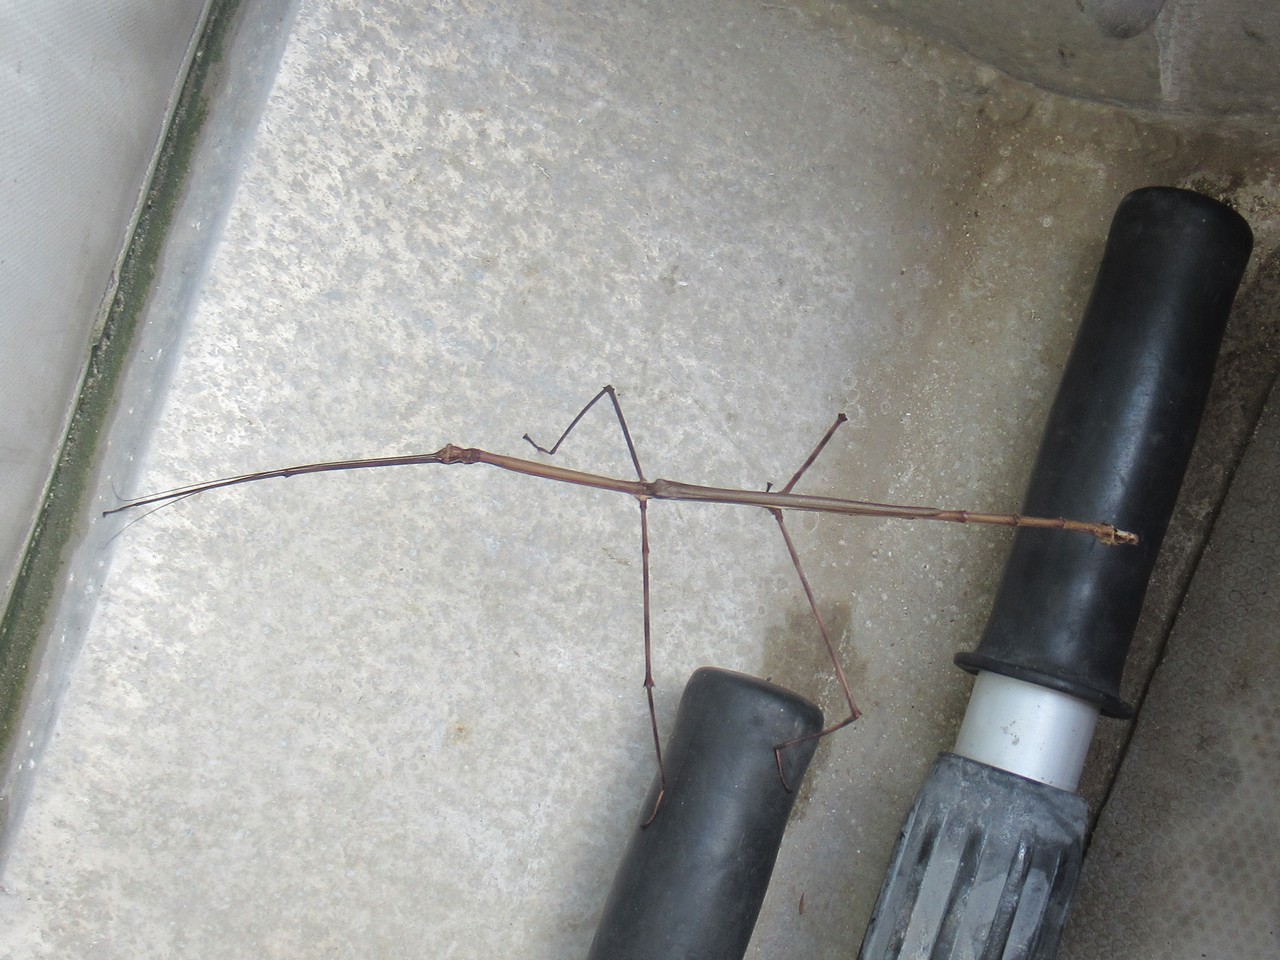 Sticky the stick insect hitches a ride.